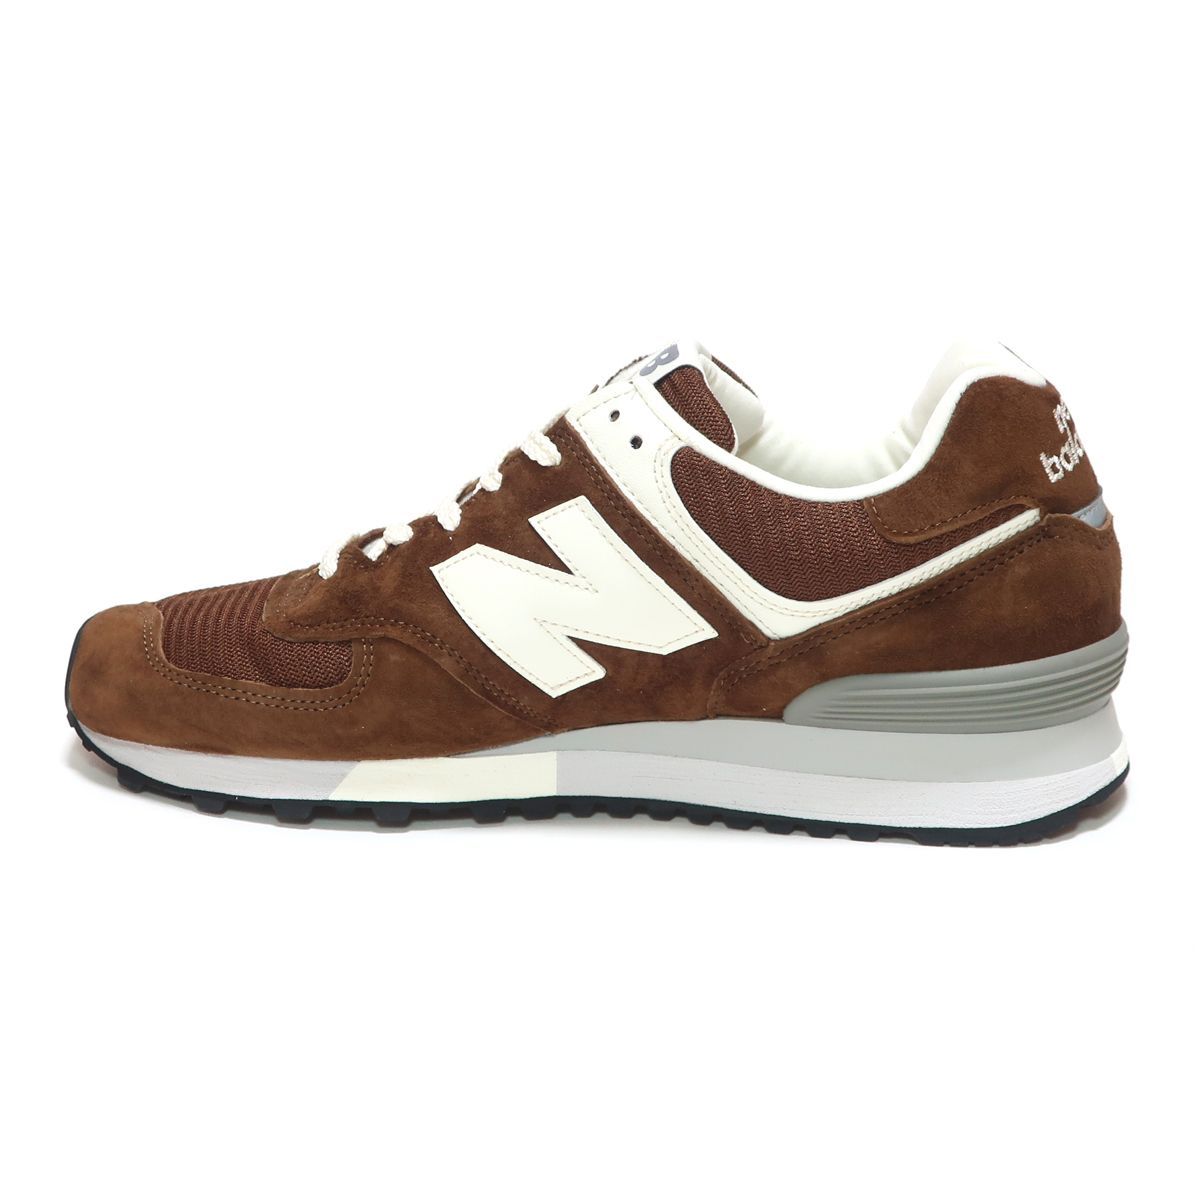 NEW BALANCE OU576BRN BROWN SUEDE MADE IN UK M576 ENGLAND ...